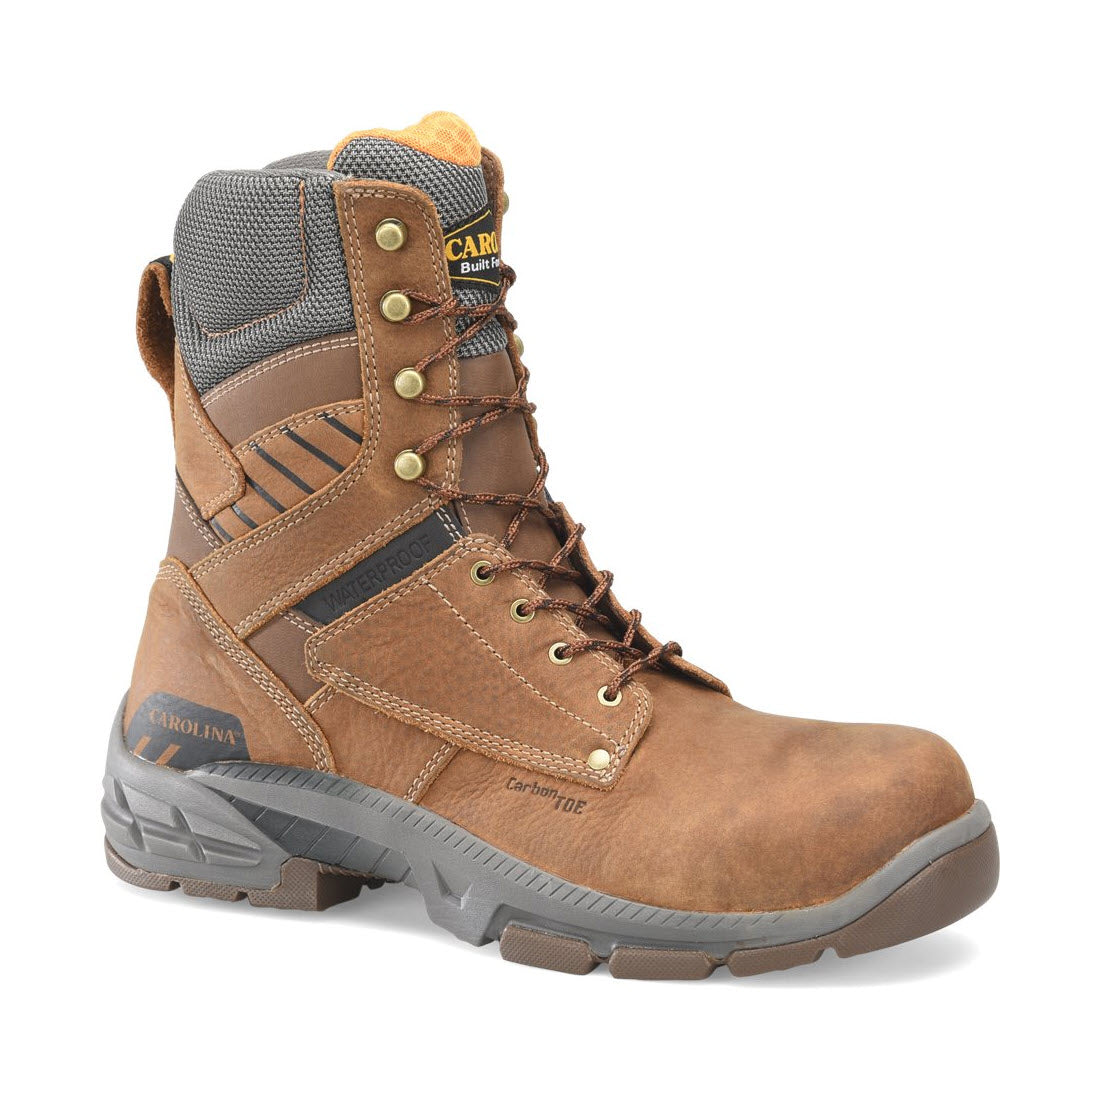 Carolina 8" Composite Toe Duke Brown - Men's waterproof leather work boot with laces on a white background, featuring a Carbon Composite Safety Toe that meets ASTM Standards.